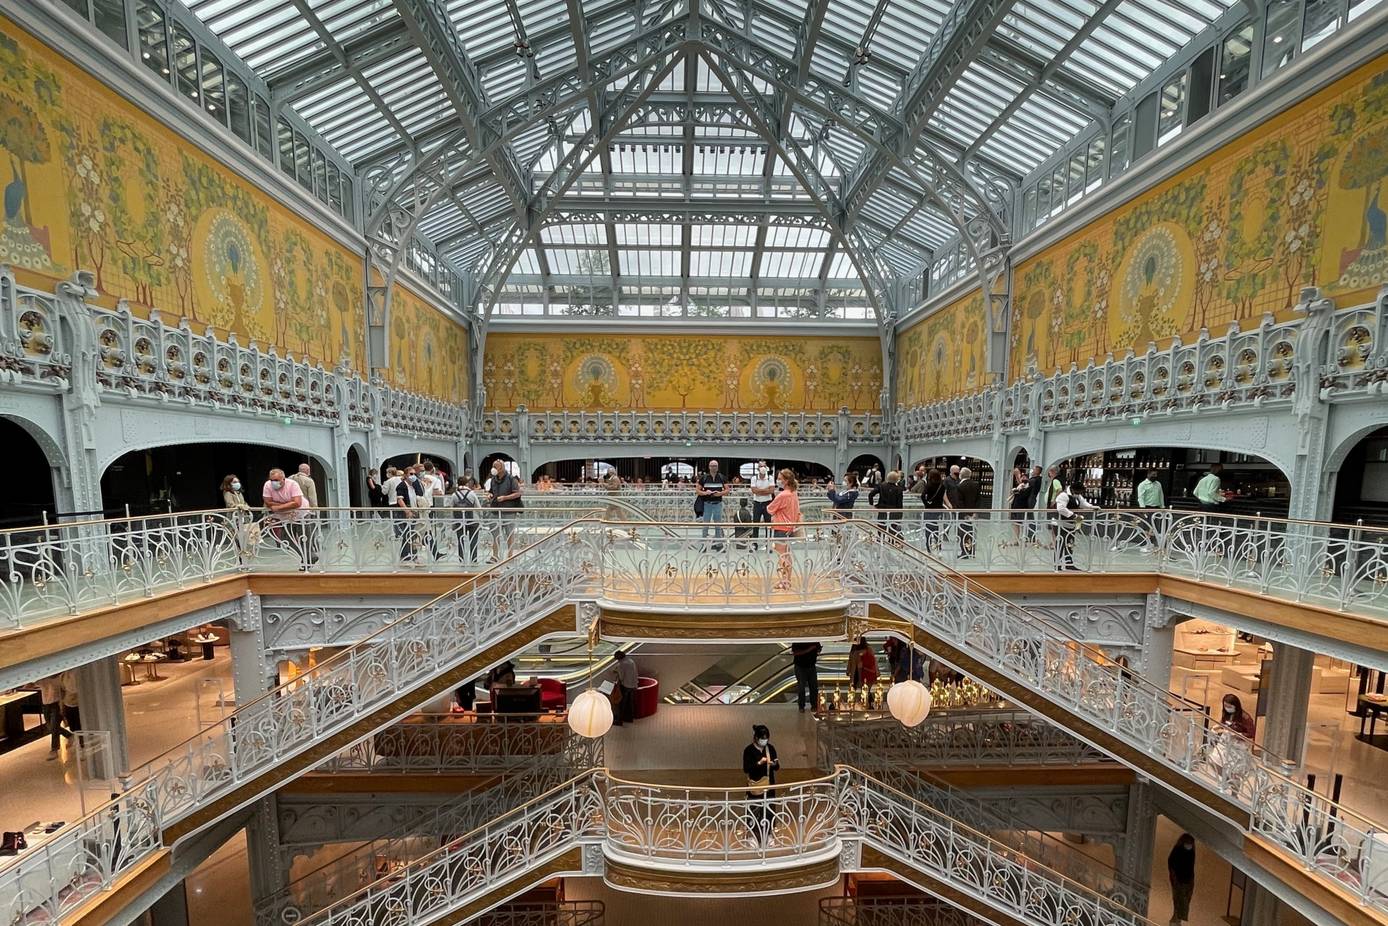 The Samaritaine: 16 years after its closure, the department store